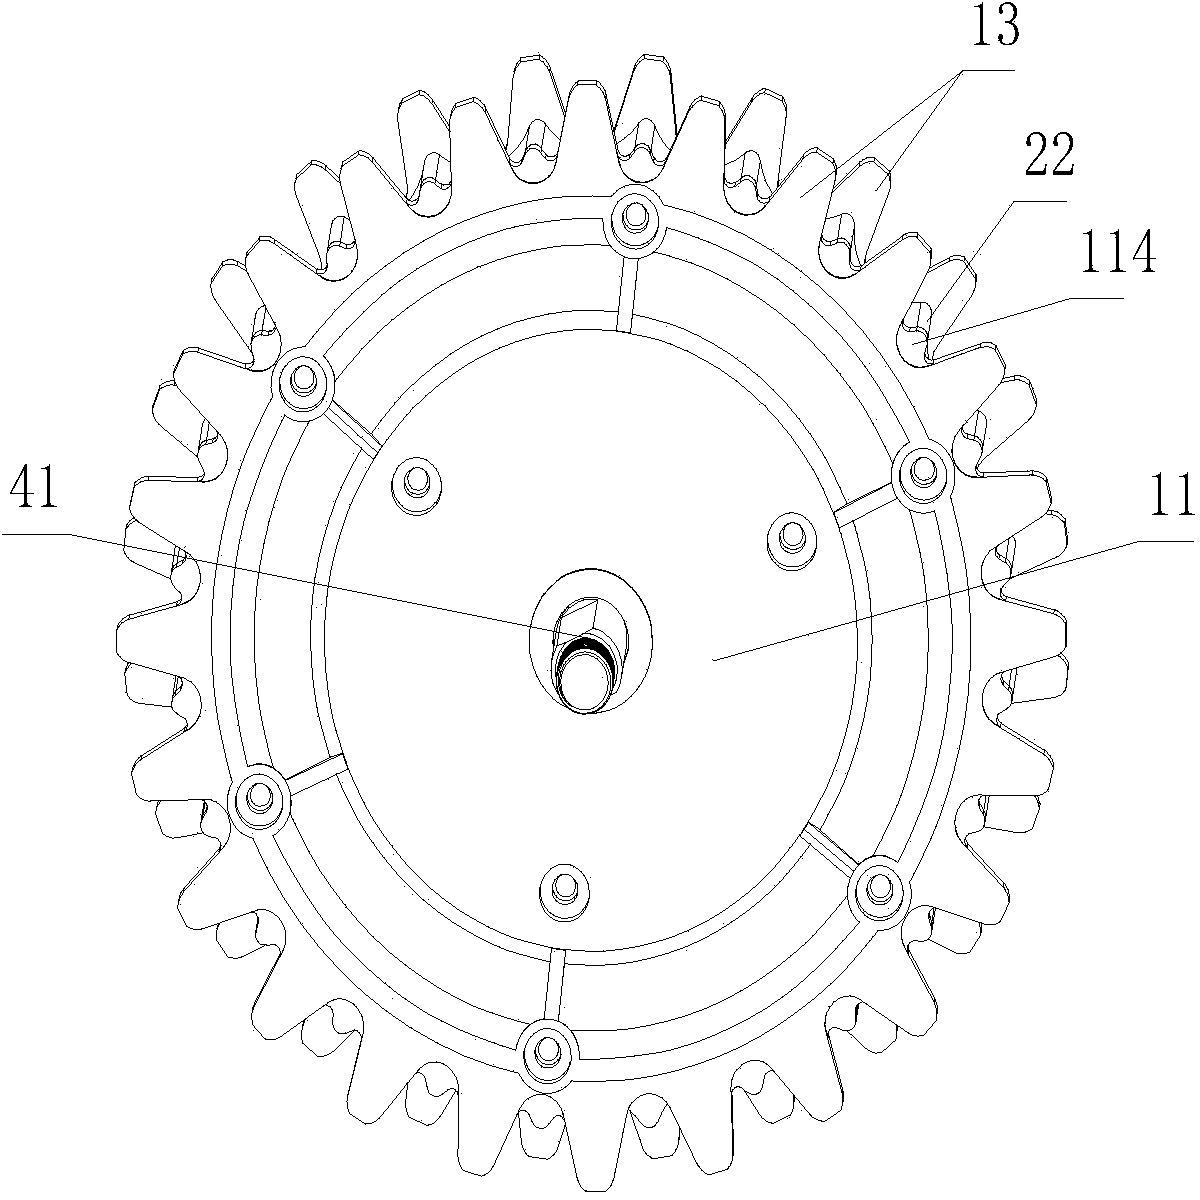 Direct drive mower driving wheel with built-in outer rotor motor and mower